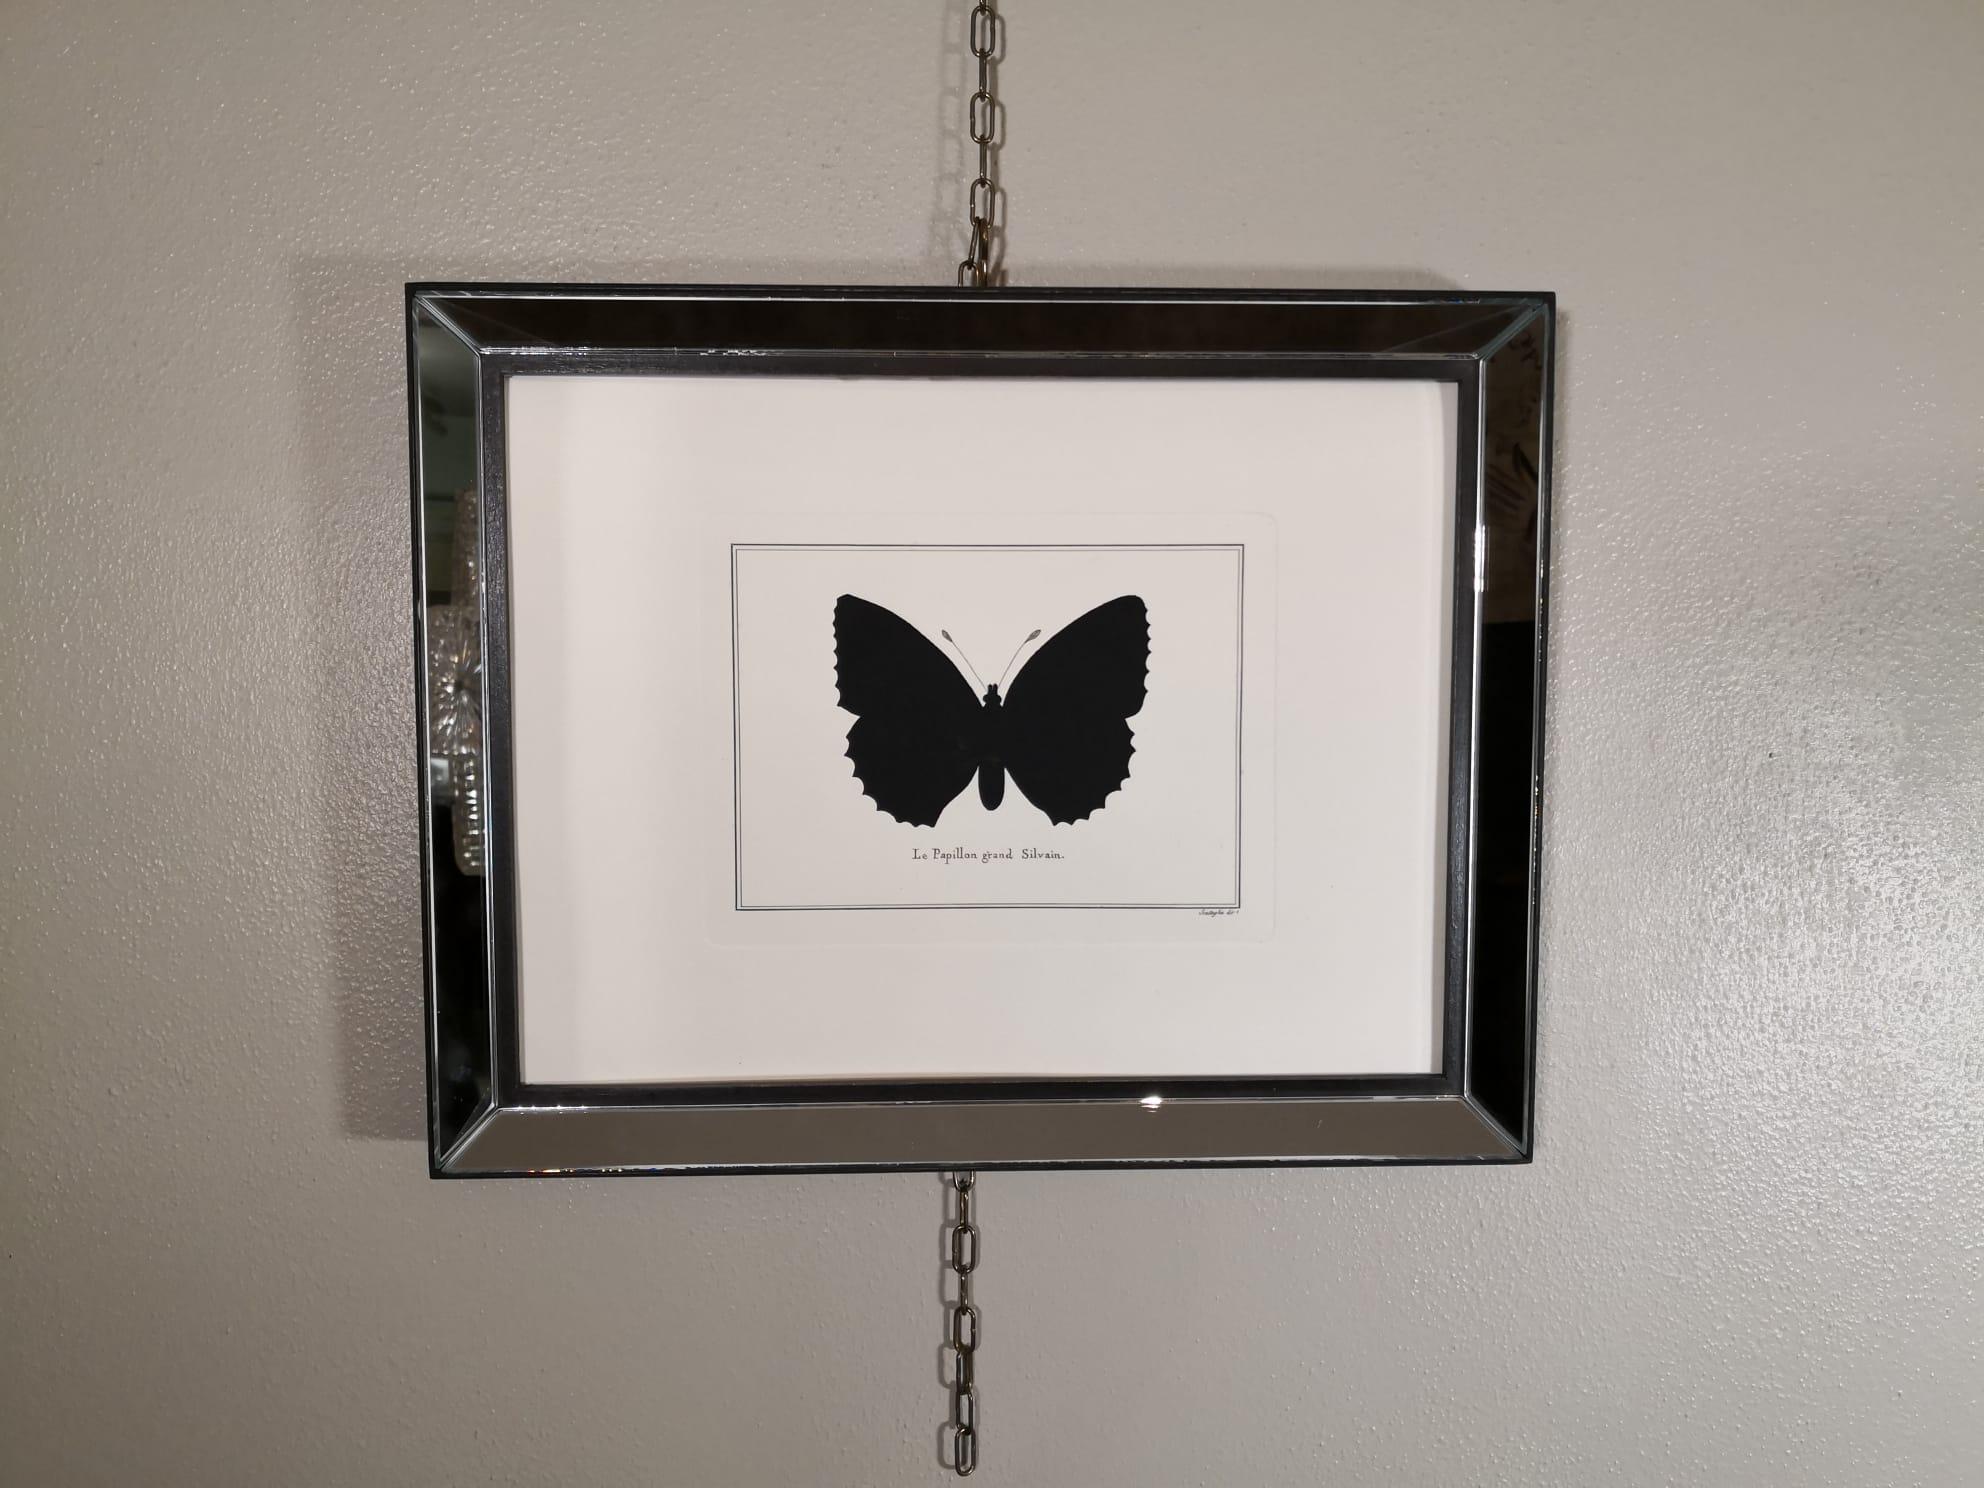 Artistic decorative hand water colored print representing a poplar admiral butterfly.
This print has been pressed with an ancient press called 